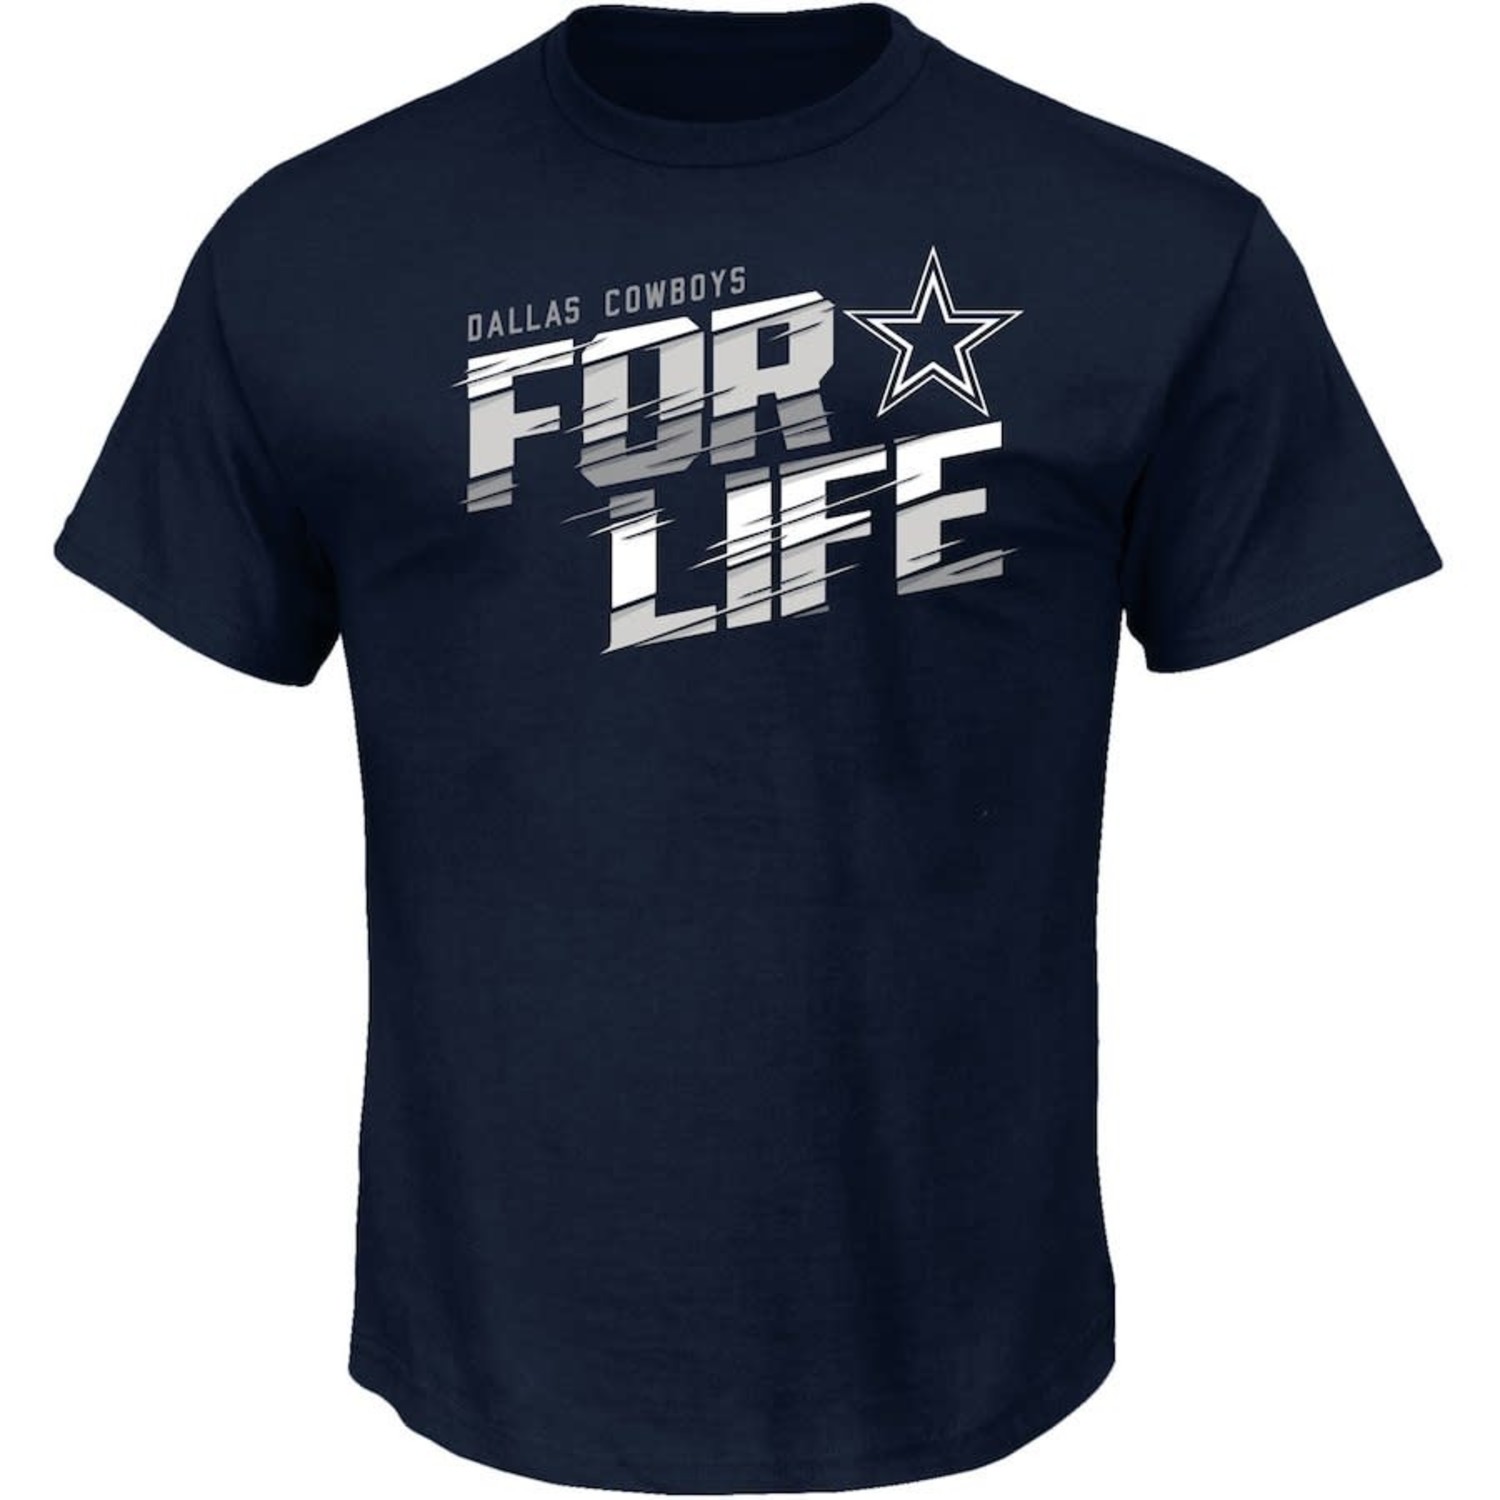 Dallas Cowboys M For Life Tee - The Locker Room of Downey